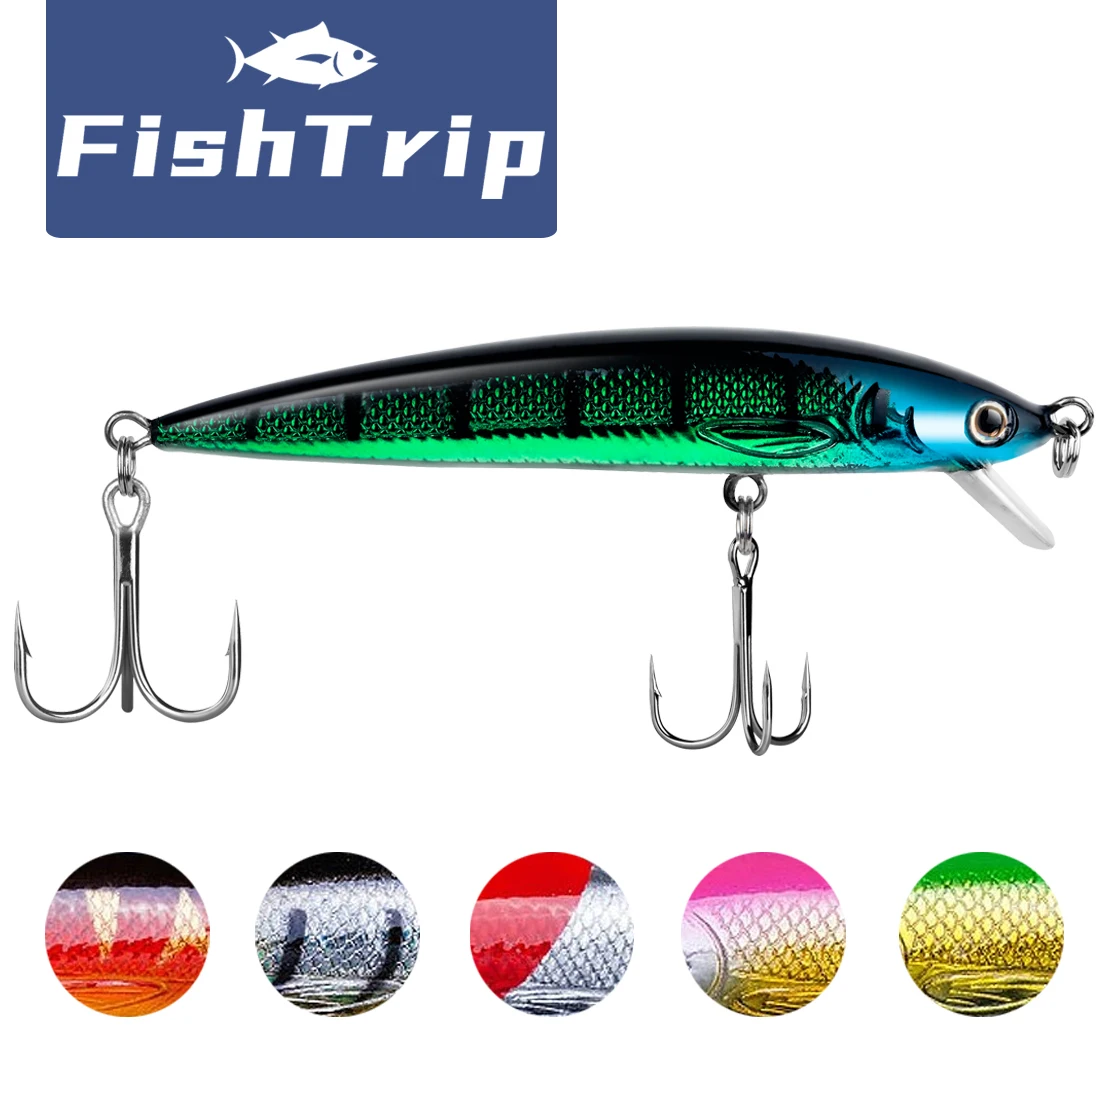 

FishTrip Topwater Minnow Lure Subsurface Lure Fishing Lures Hard Bait for Bass, Walleye, Trout, Salmon, Steelhead, Northern Pike